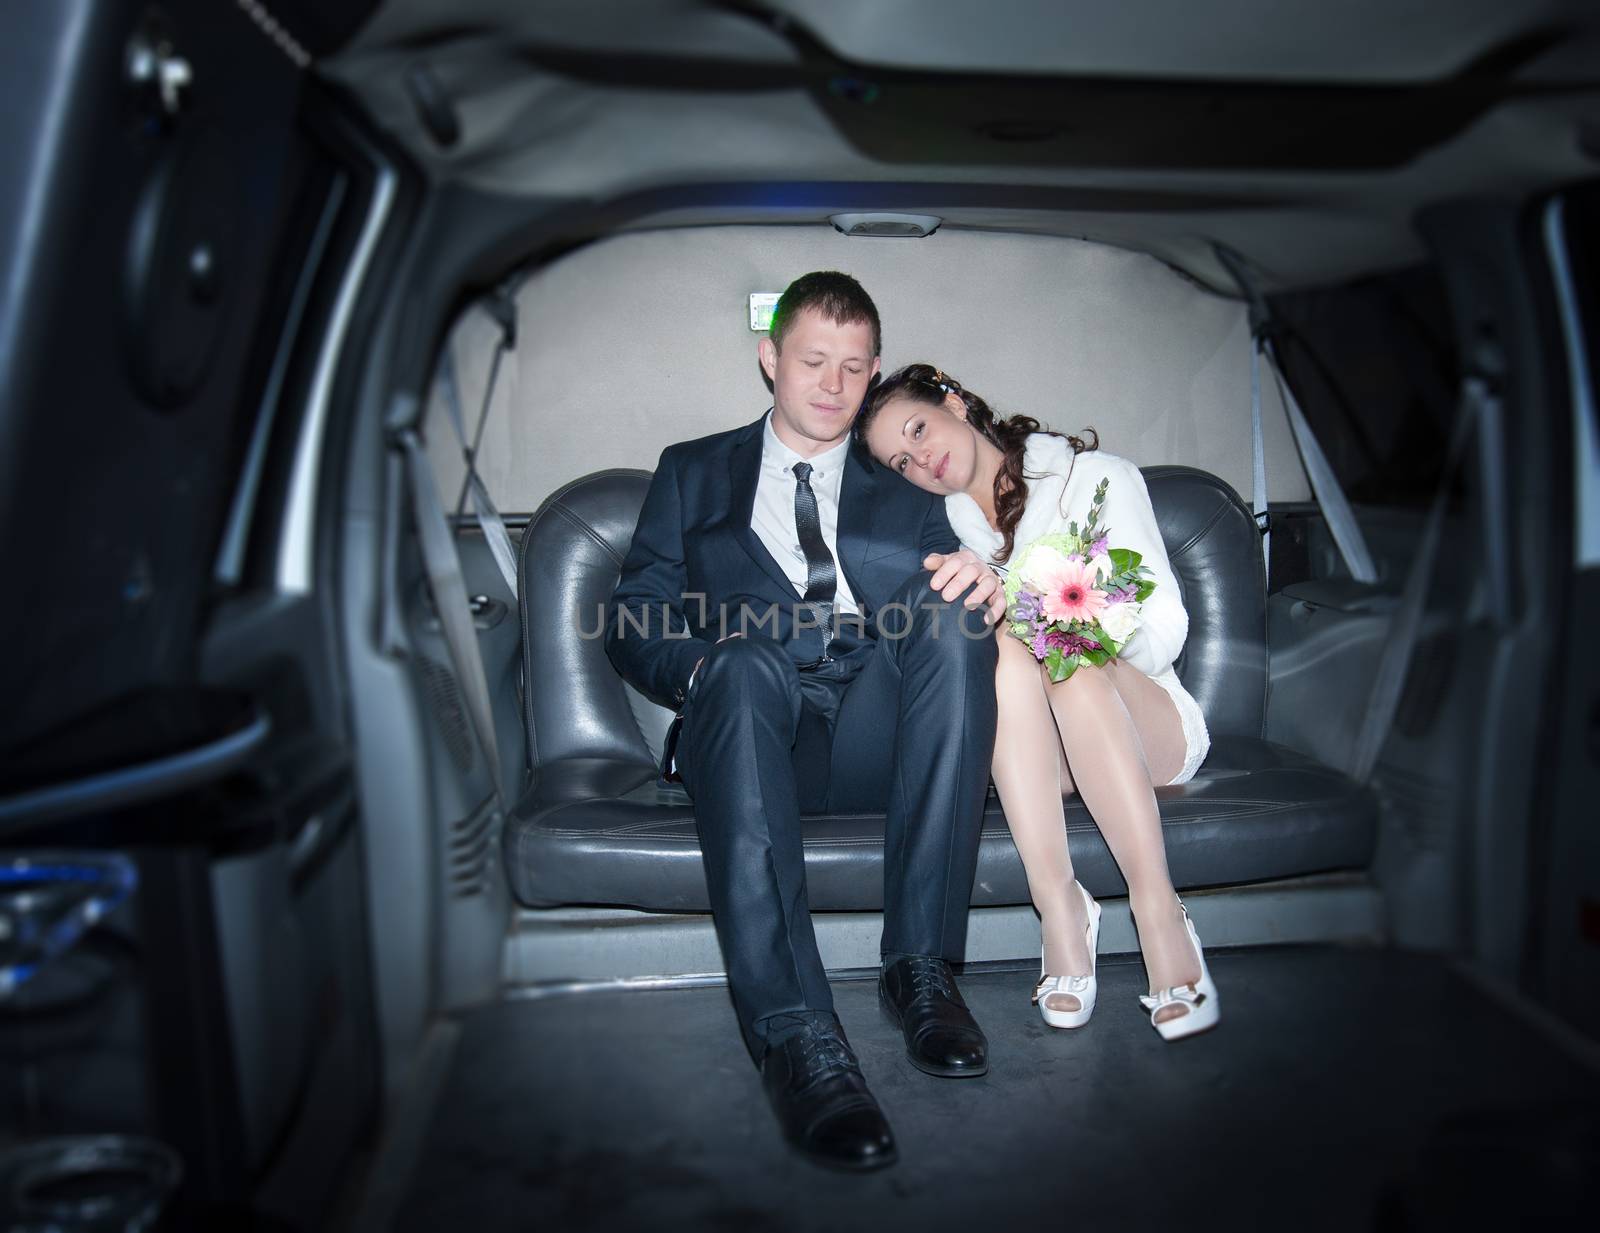 Newlyweds in the limousine  by raduga21